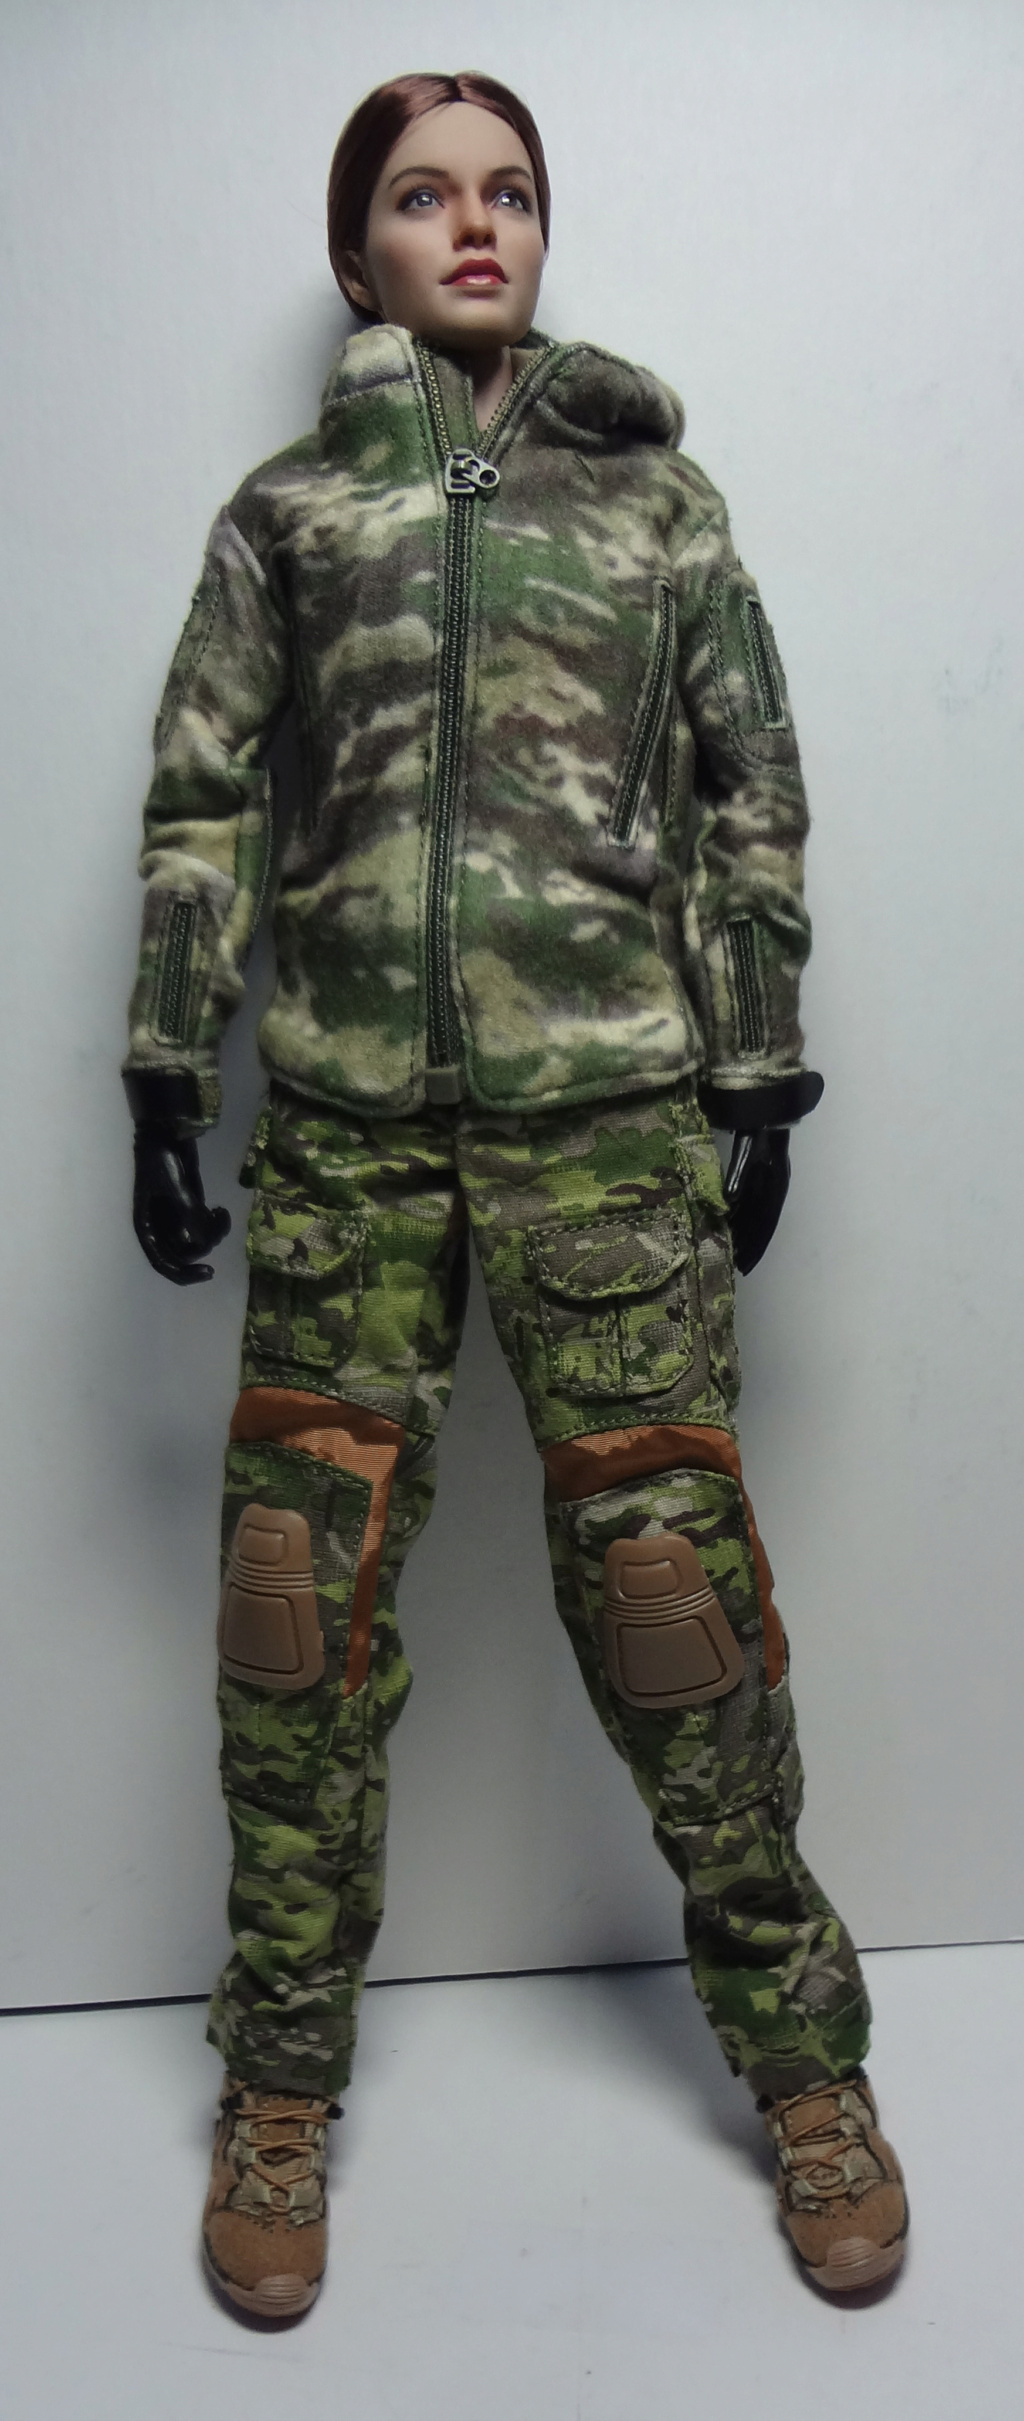 verycool - NEW PRODUCT: VERYCOOL: 1/6 Miss Spetsnaz: Russian Special Combat Russian special combat female action figure (#VCF-2052) - Page 4 0310